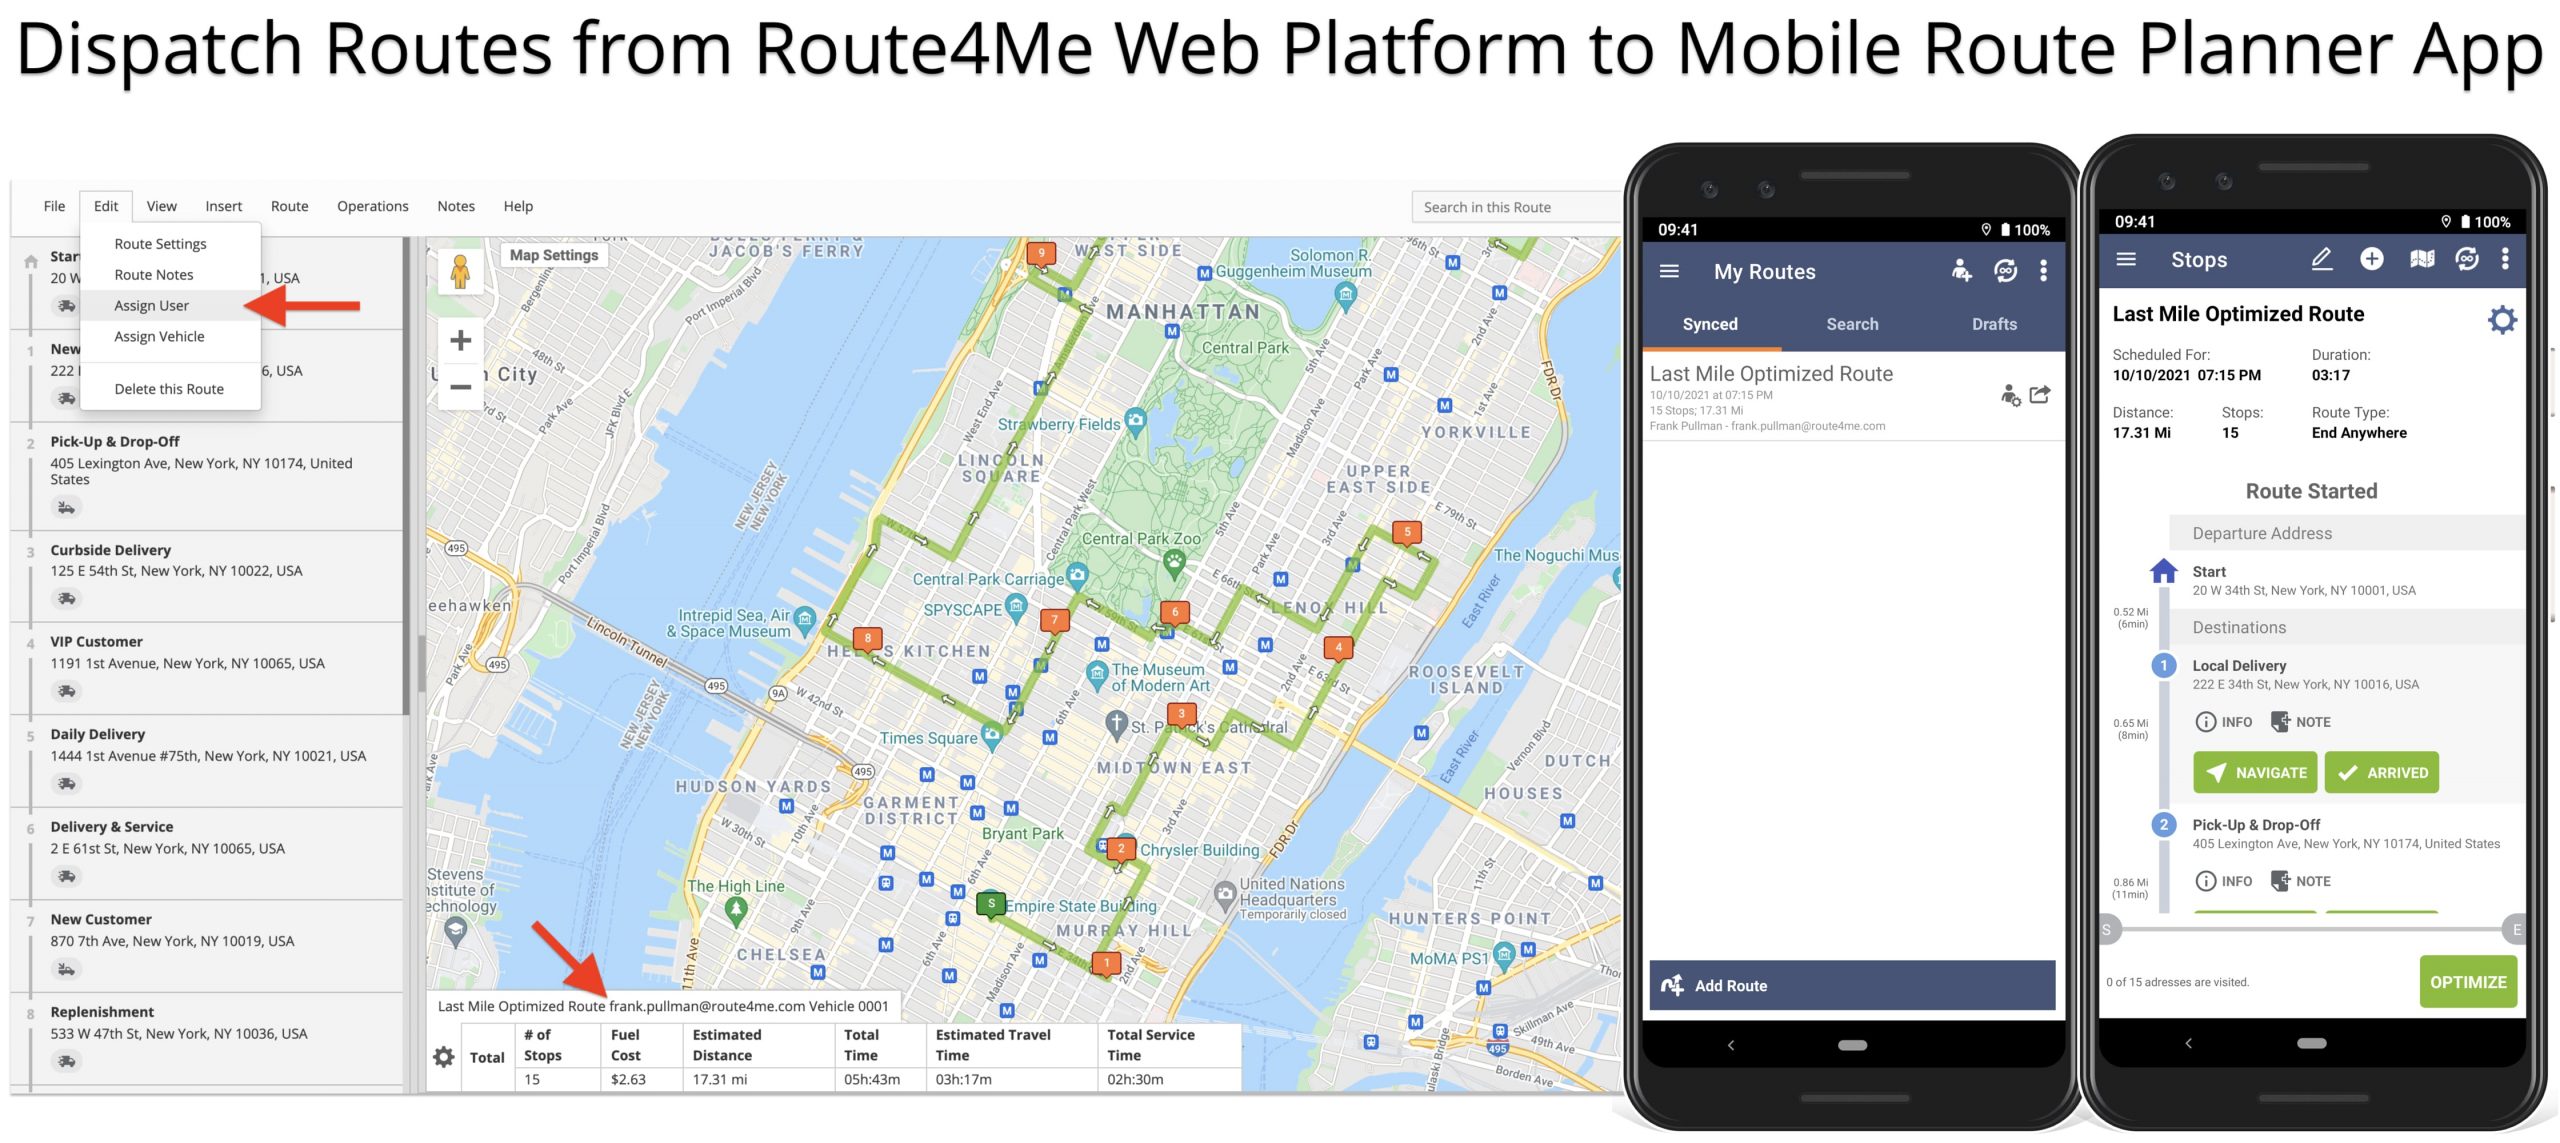 Dispatch routes from the Web Platform to the Android Route Planner app.